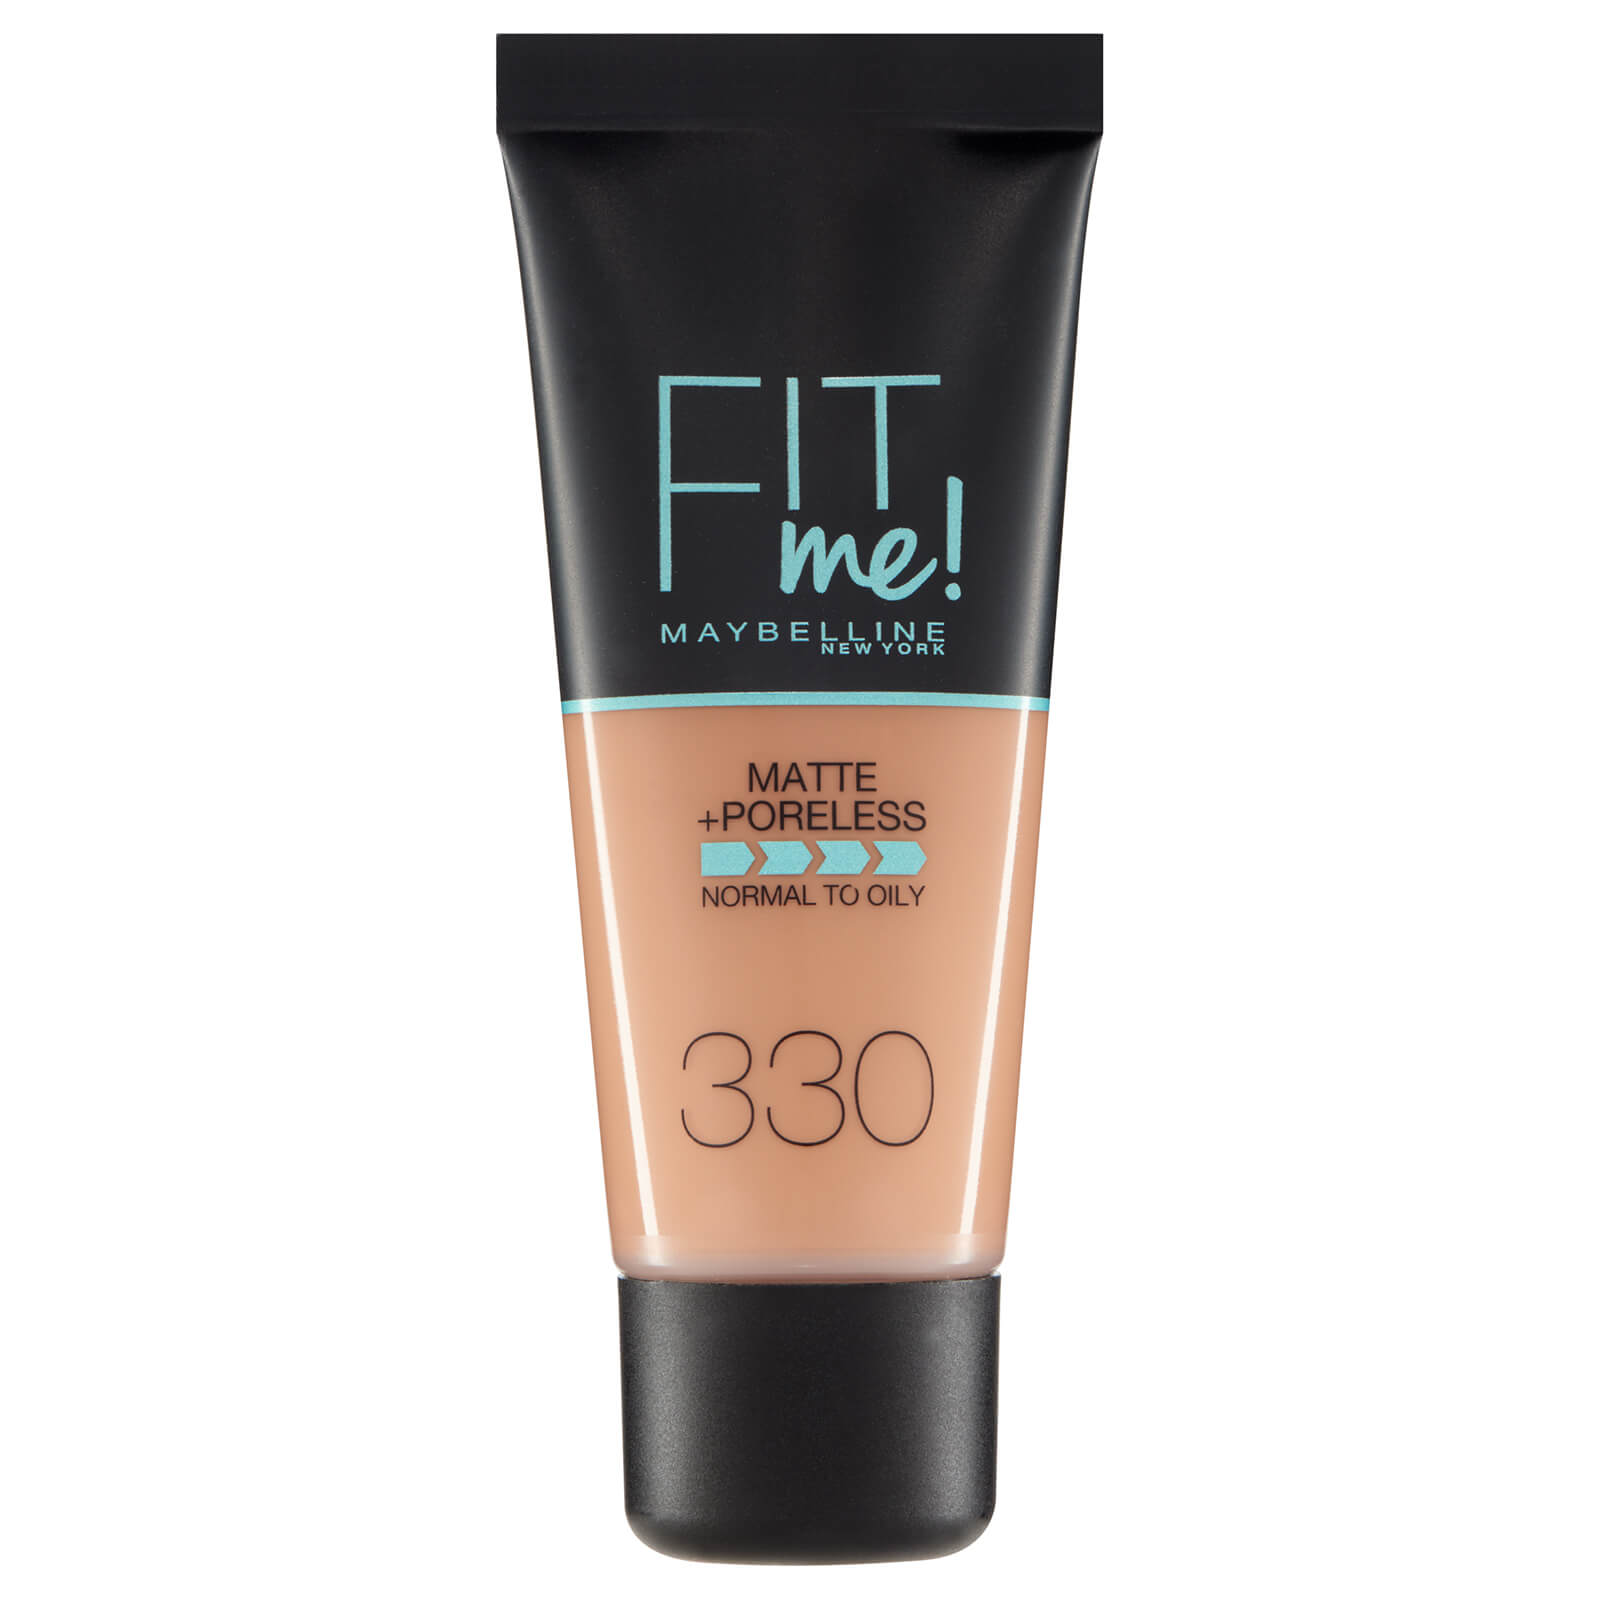 Maybelline Fit Me! Matte and Poreless Foundation 30ml (Various Shades) - 330 Toffee